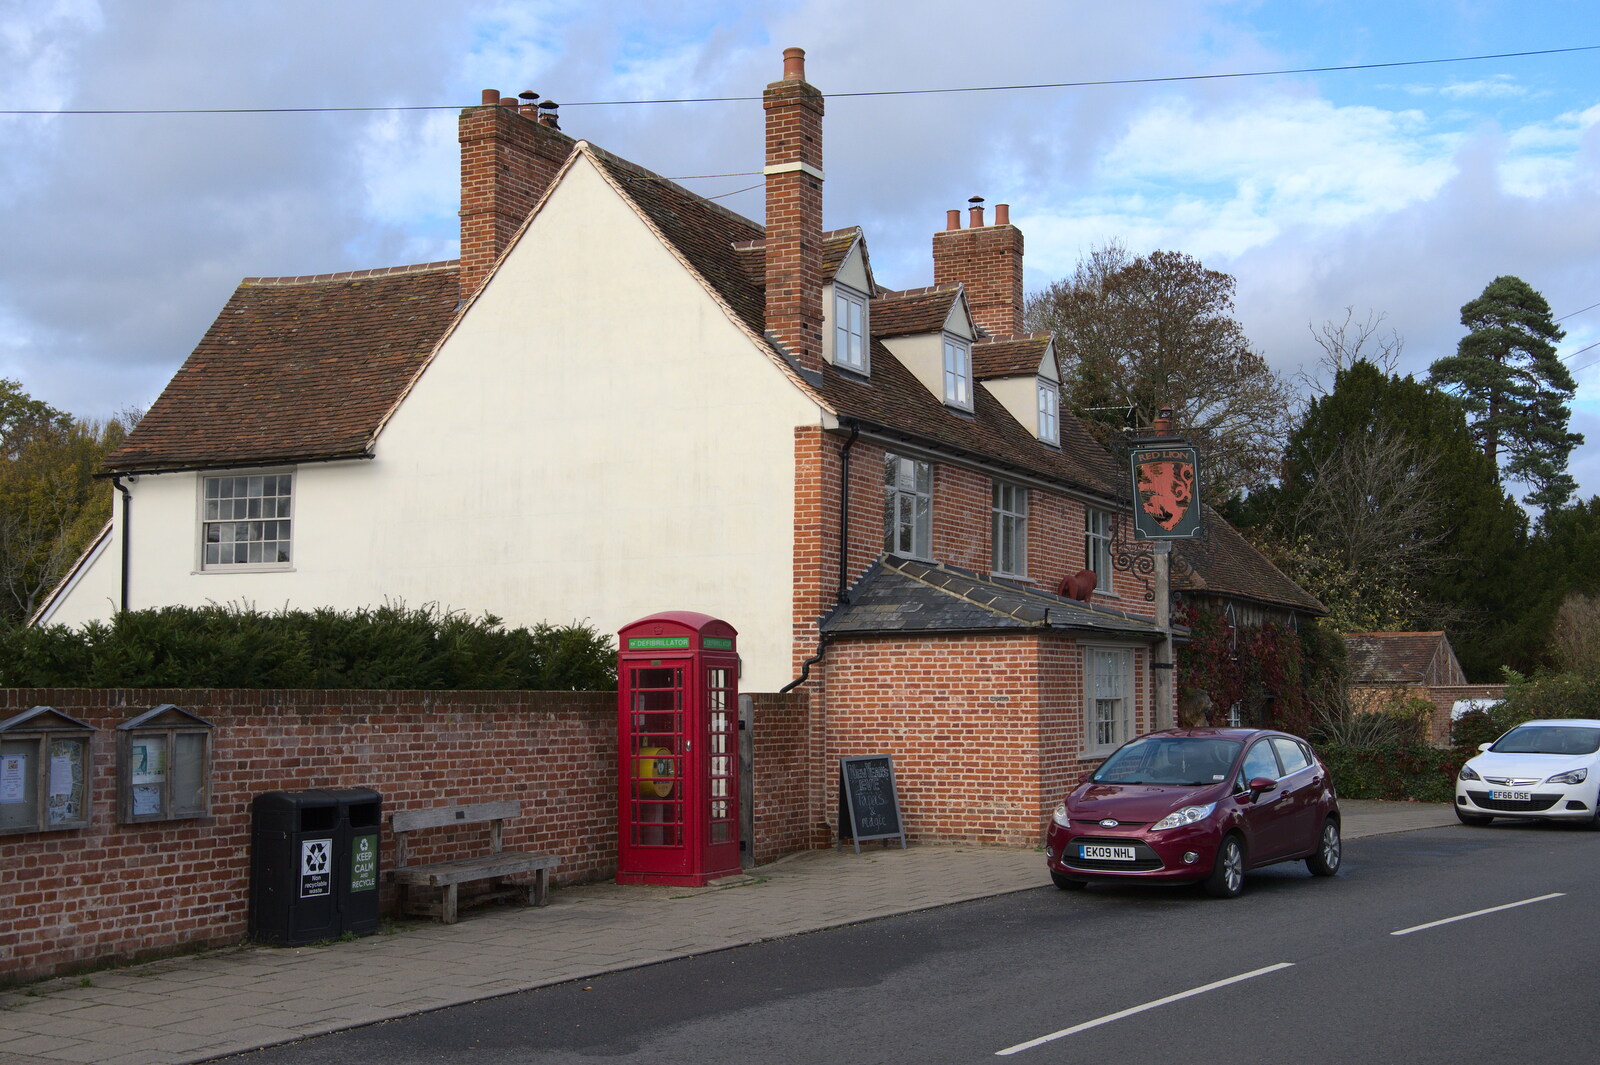 A Postcard from Flatford and Dedham, Suffolk and Essex, 9th November 2022: A K6 phonebox outside the Red Lion